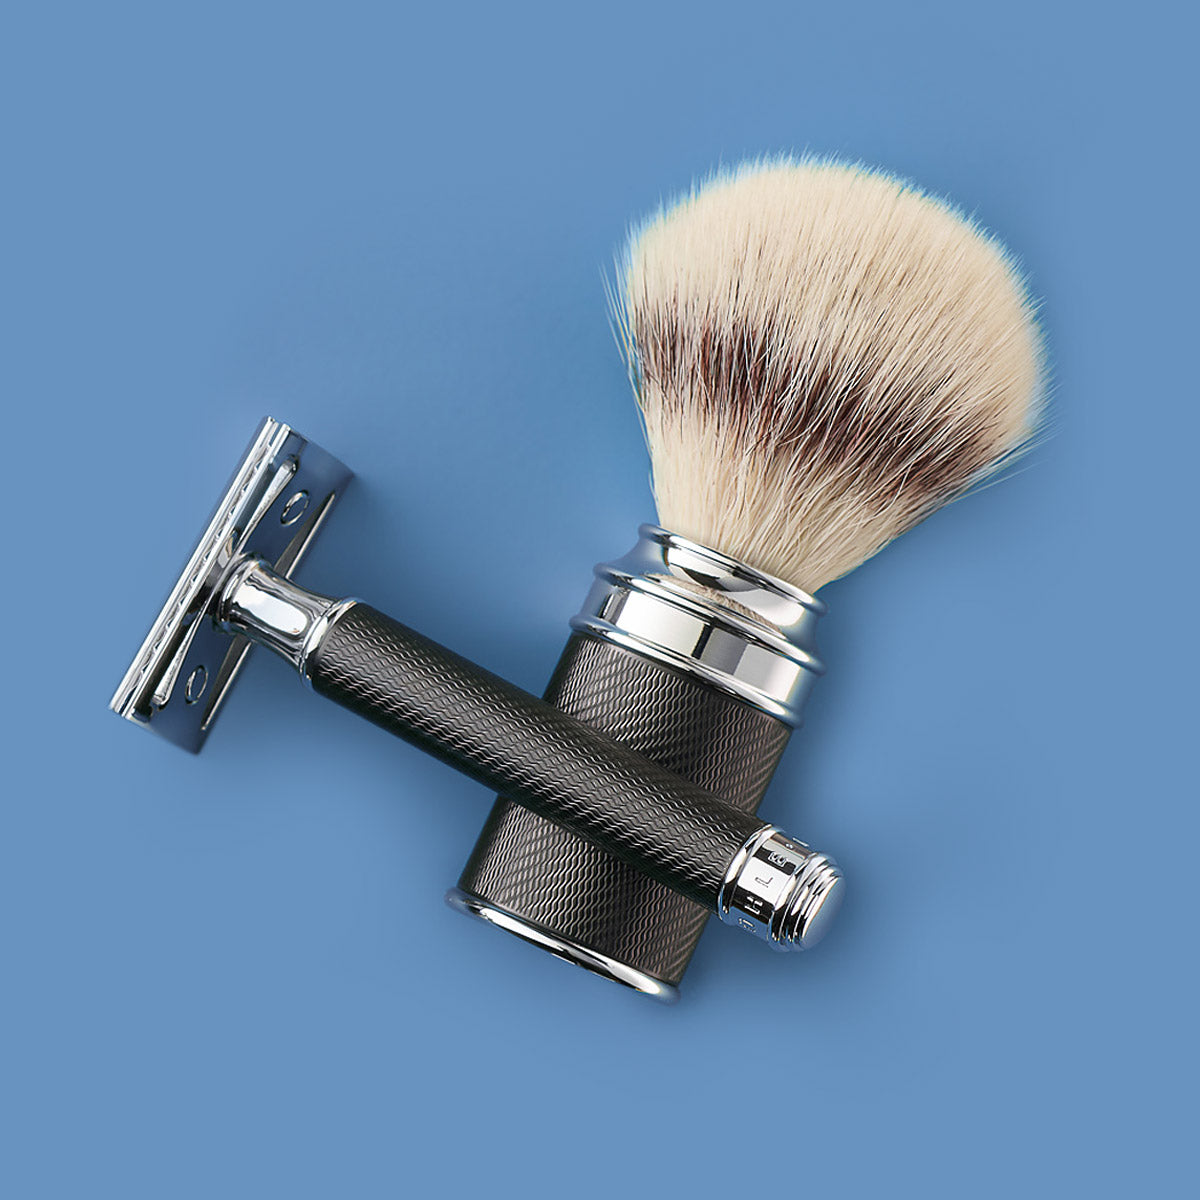 muehle traditional shaving accessories 874e0218 0364 4a86 9d35 3895f4cff791